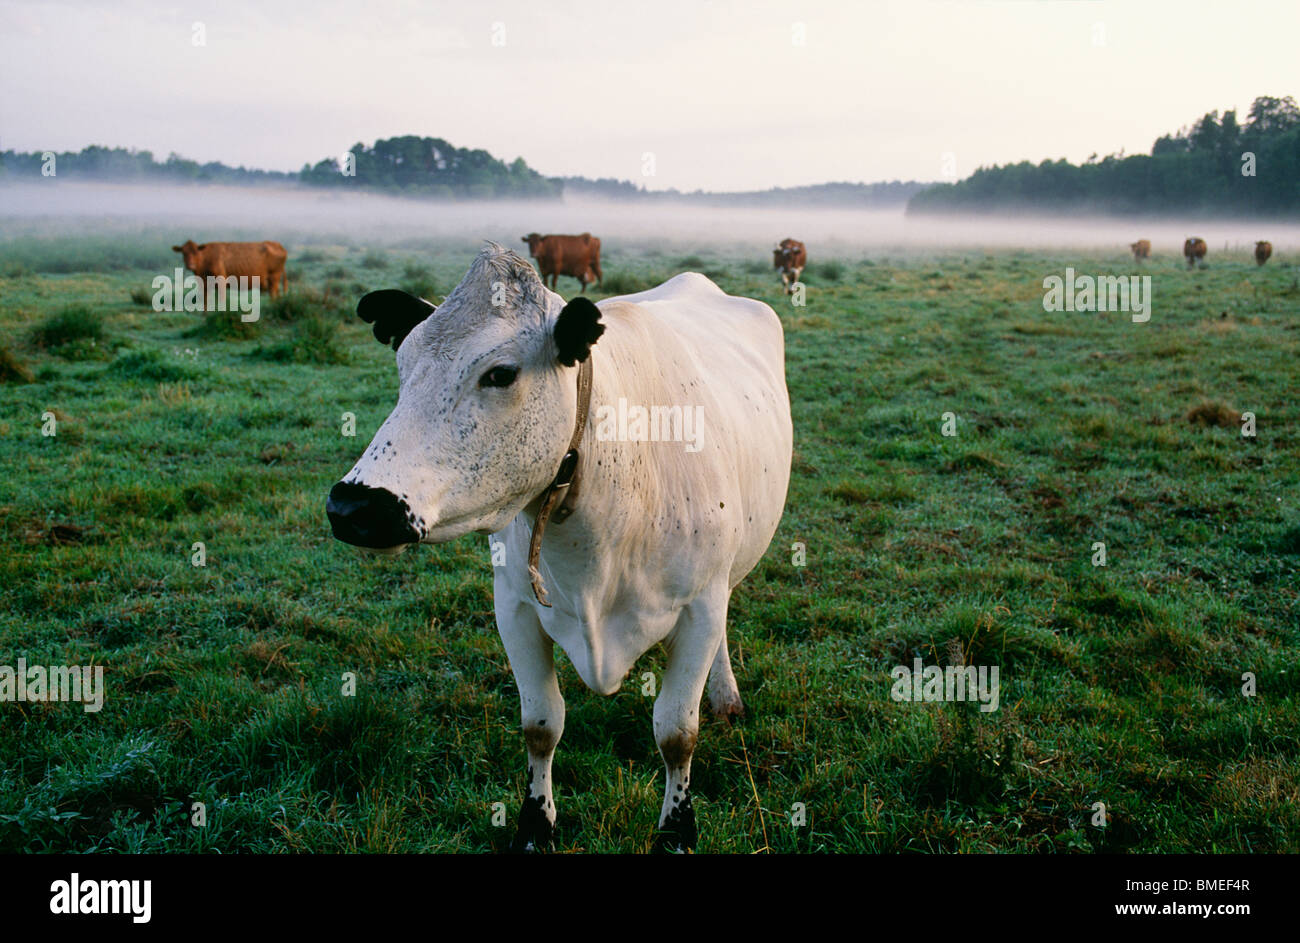 View of cows in field Stock Photo